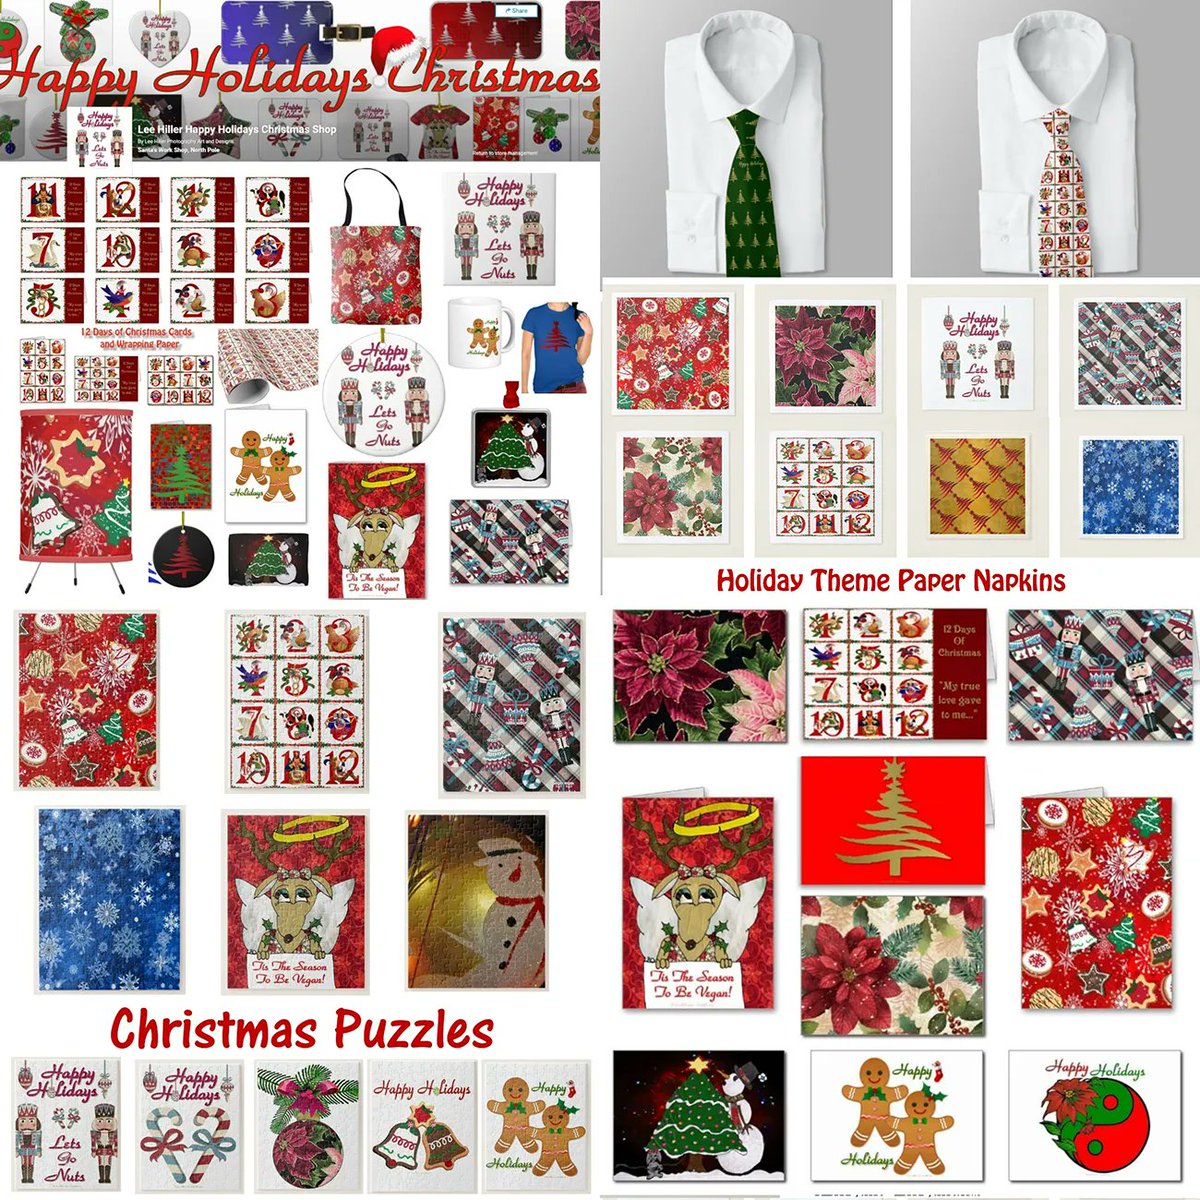 🌟🎄🎁🎄🎁🎄🌟
The #HappyHolidays Shop is Always Open!
#Christmas #12DaysOfChristmas #ChristmasTree #snowflake #Nutcracker #poinsettia #Gingerbread #holidaycheer #Christmas2023 #holidaydecor #gifts #giftideas #homedecor #scapbooking #crafting

buff.ly/3NuLmAh